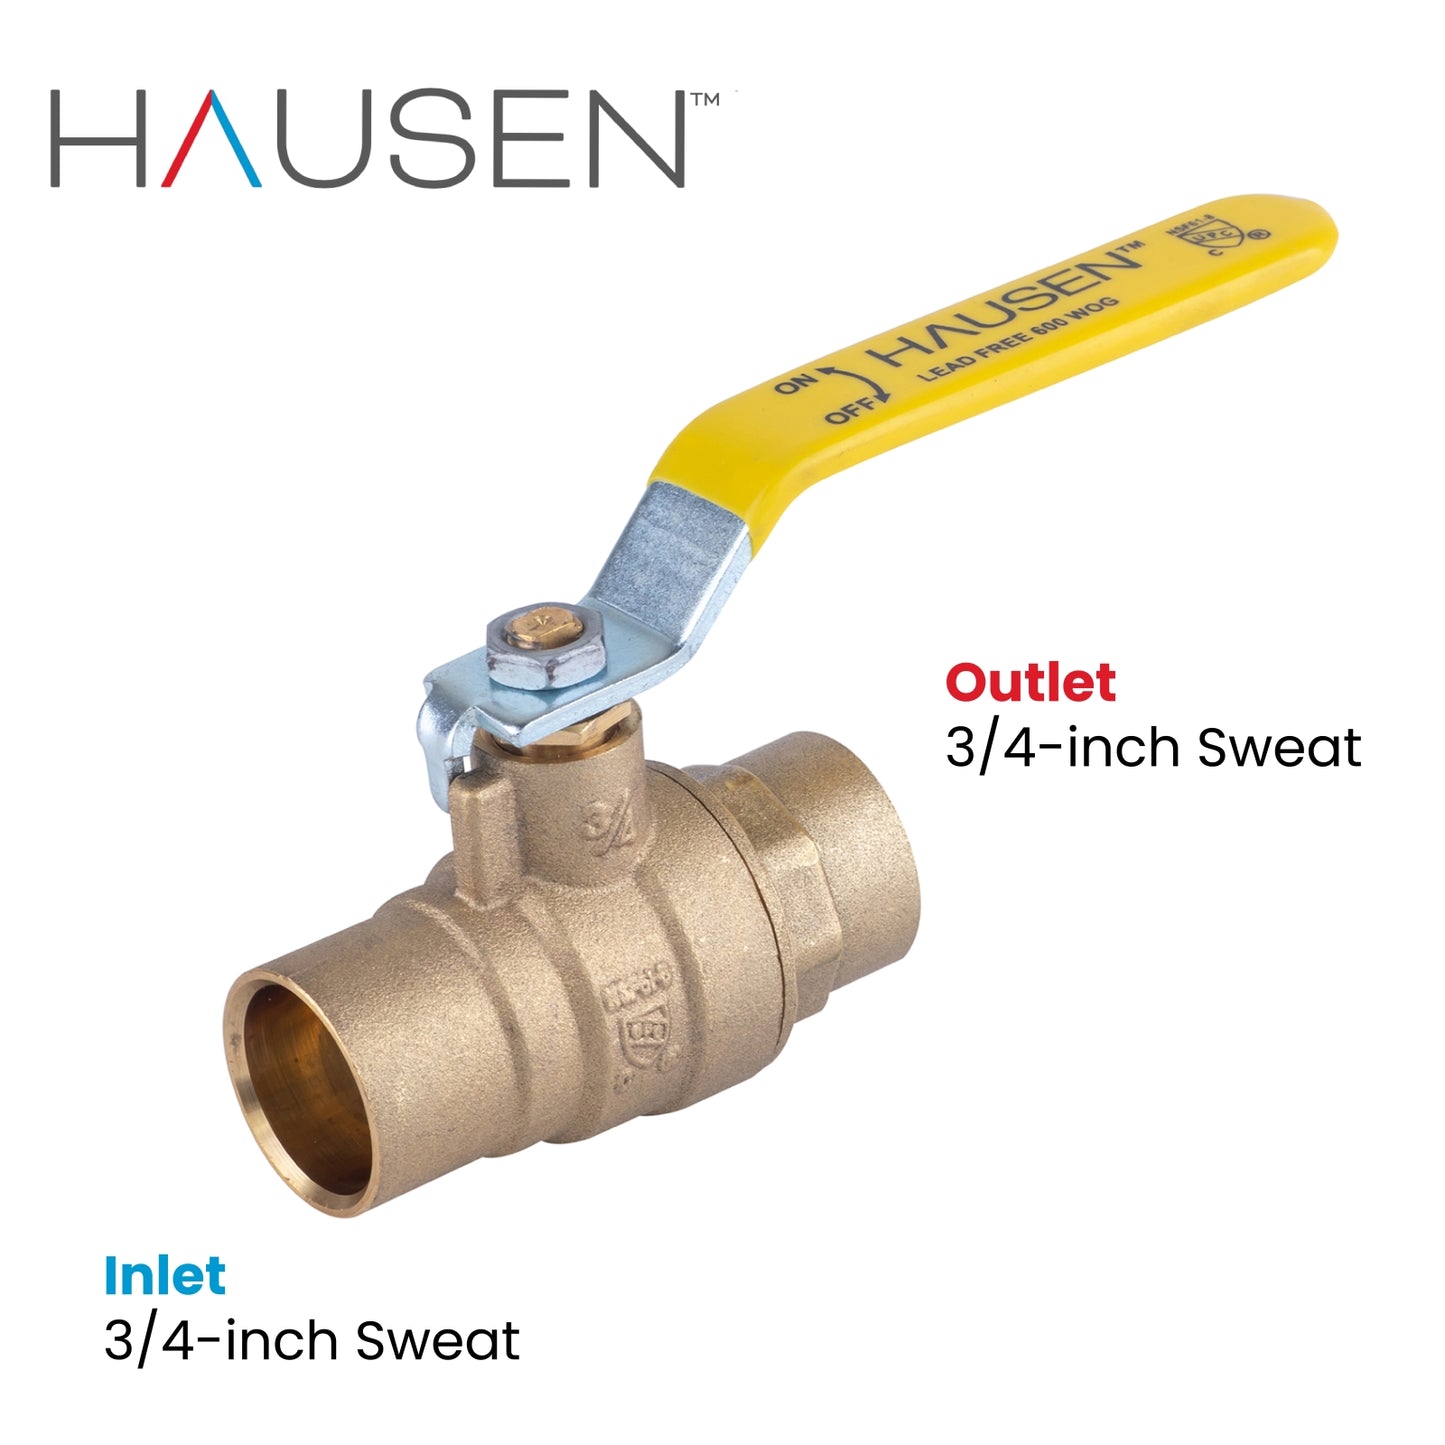 Hausen 3/4-inch Sweat x 3/4-inch Sweat Full Port Brass Ball Valve; Lead Free Forged Brass; Blowout Resistant Stem; cUPC/ANSI/NSF Certified; For Use in Potable Water Distribution Systems, 5-Pack